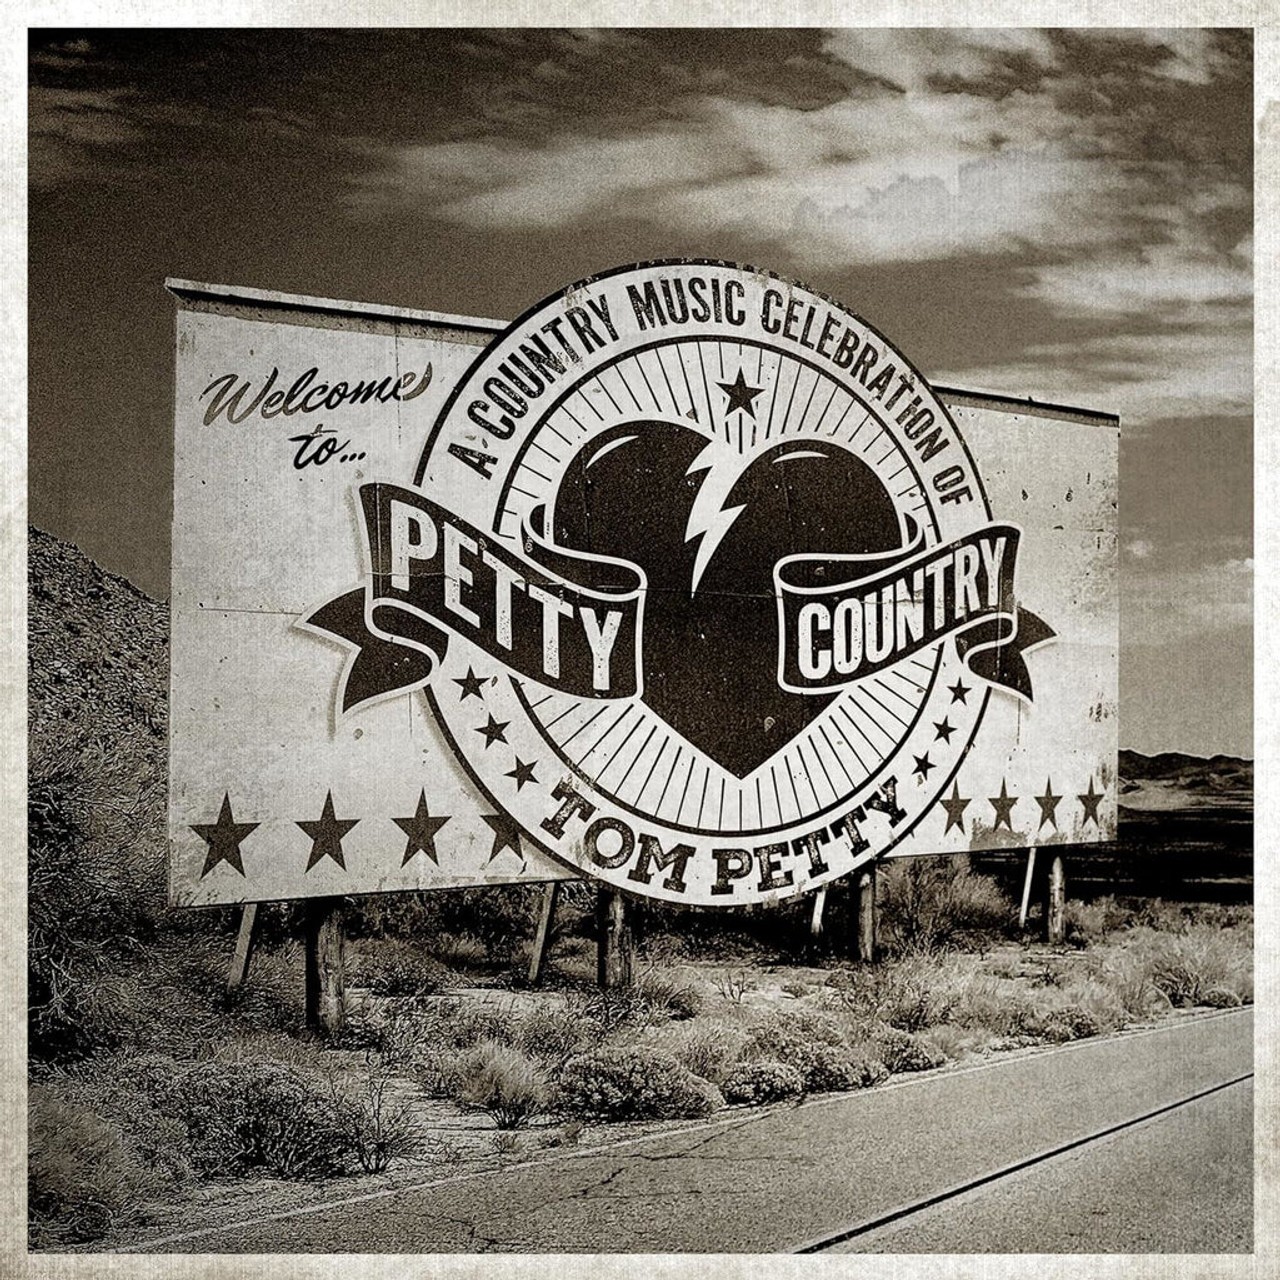 Various Artists - Petty Country - A Country Music Celebration Of Tom Petty